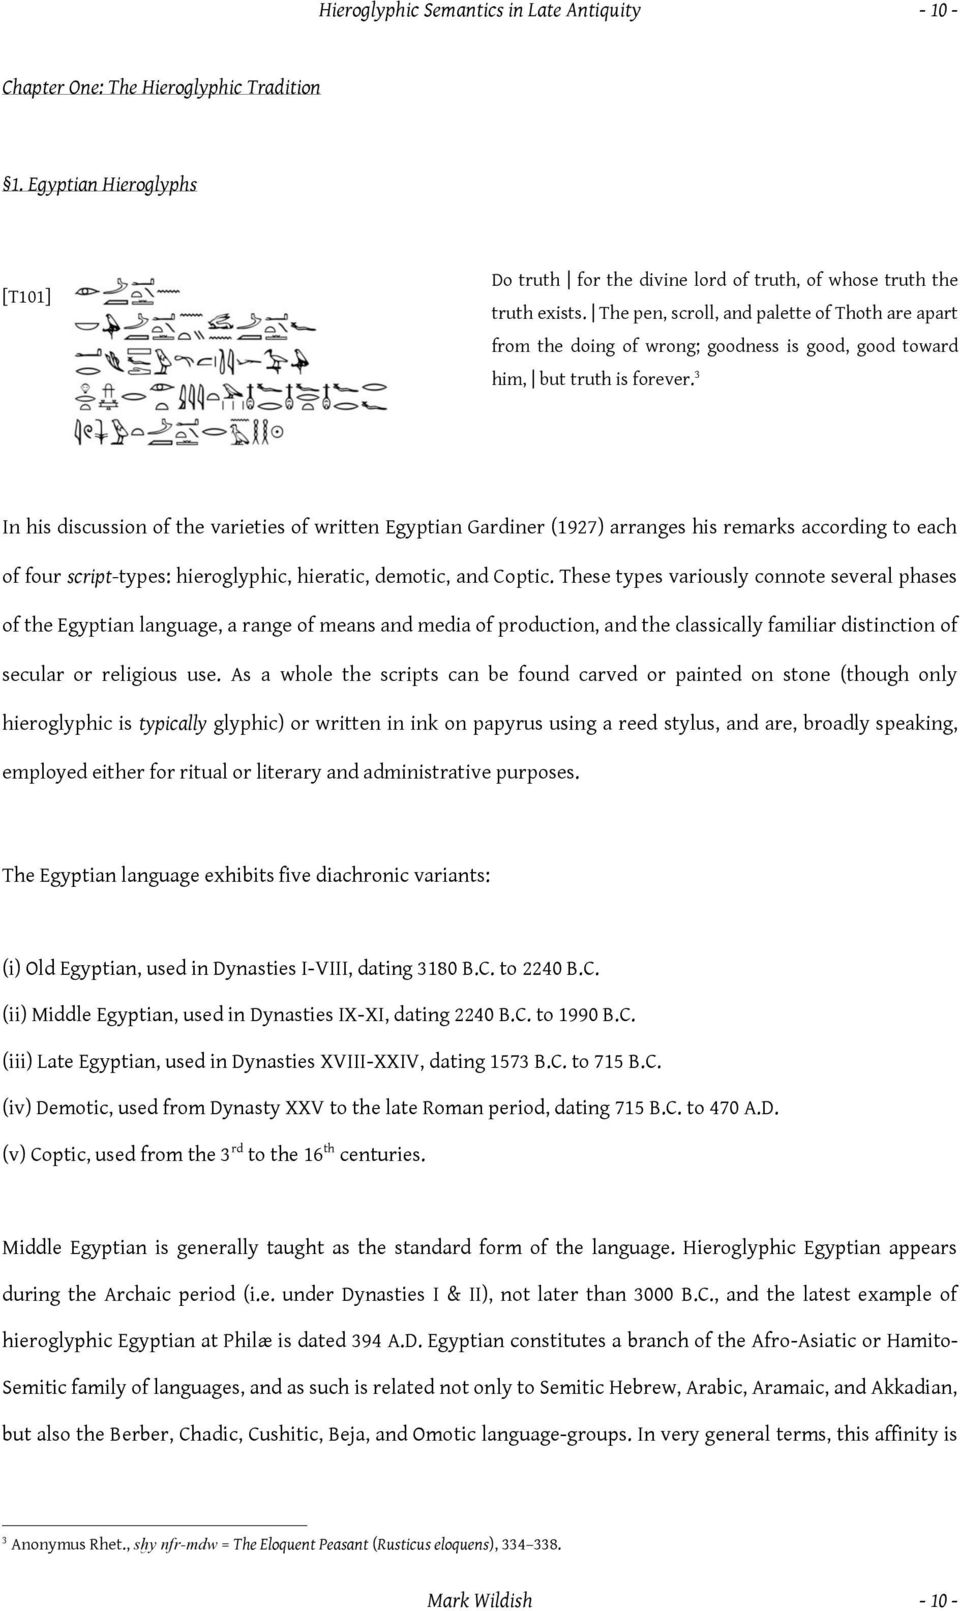 3 In his discussion of the varieties of written Egyptian Gardiner (1927) arranges his remarks according to each of four script-types: hieroglyphic, hieratic, demotic, and Coptic.